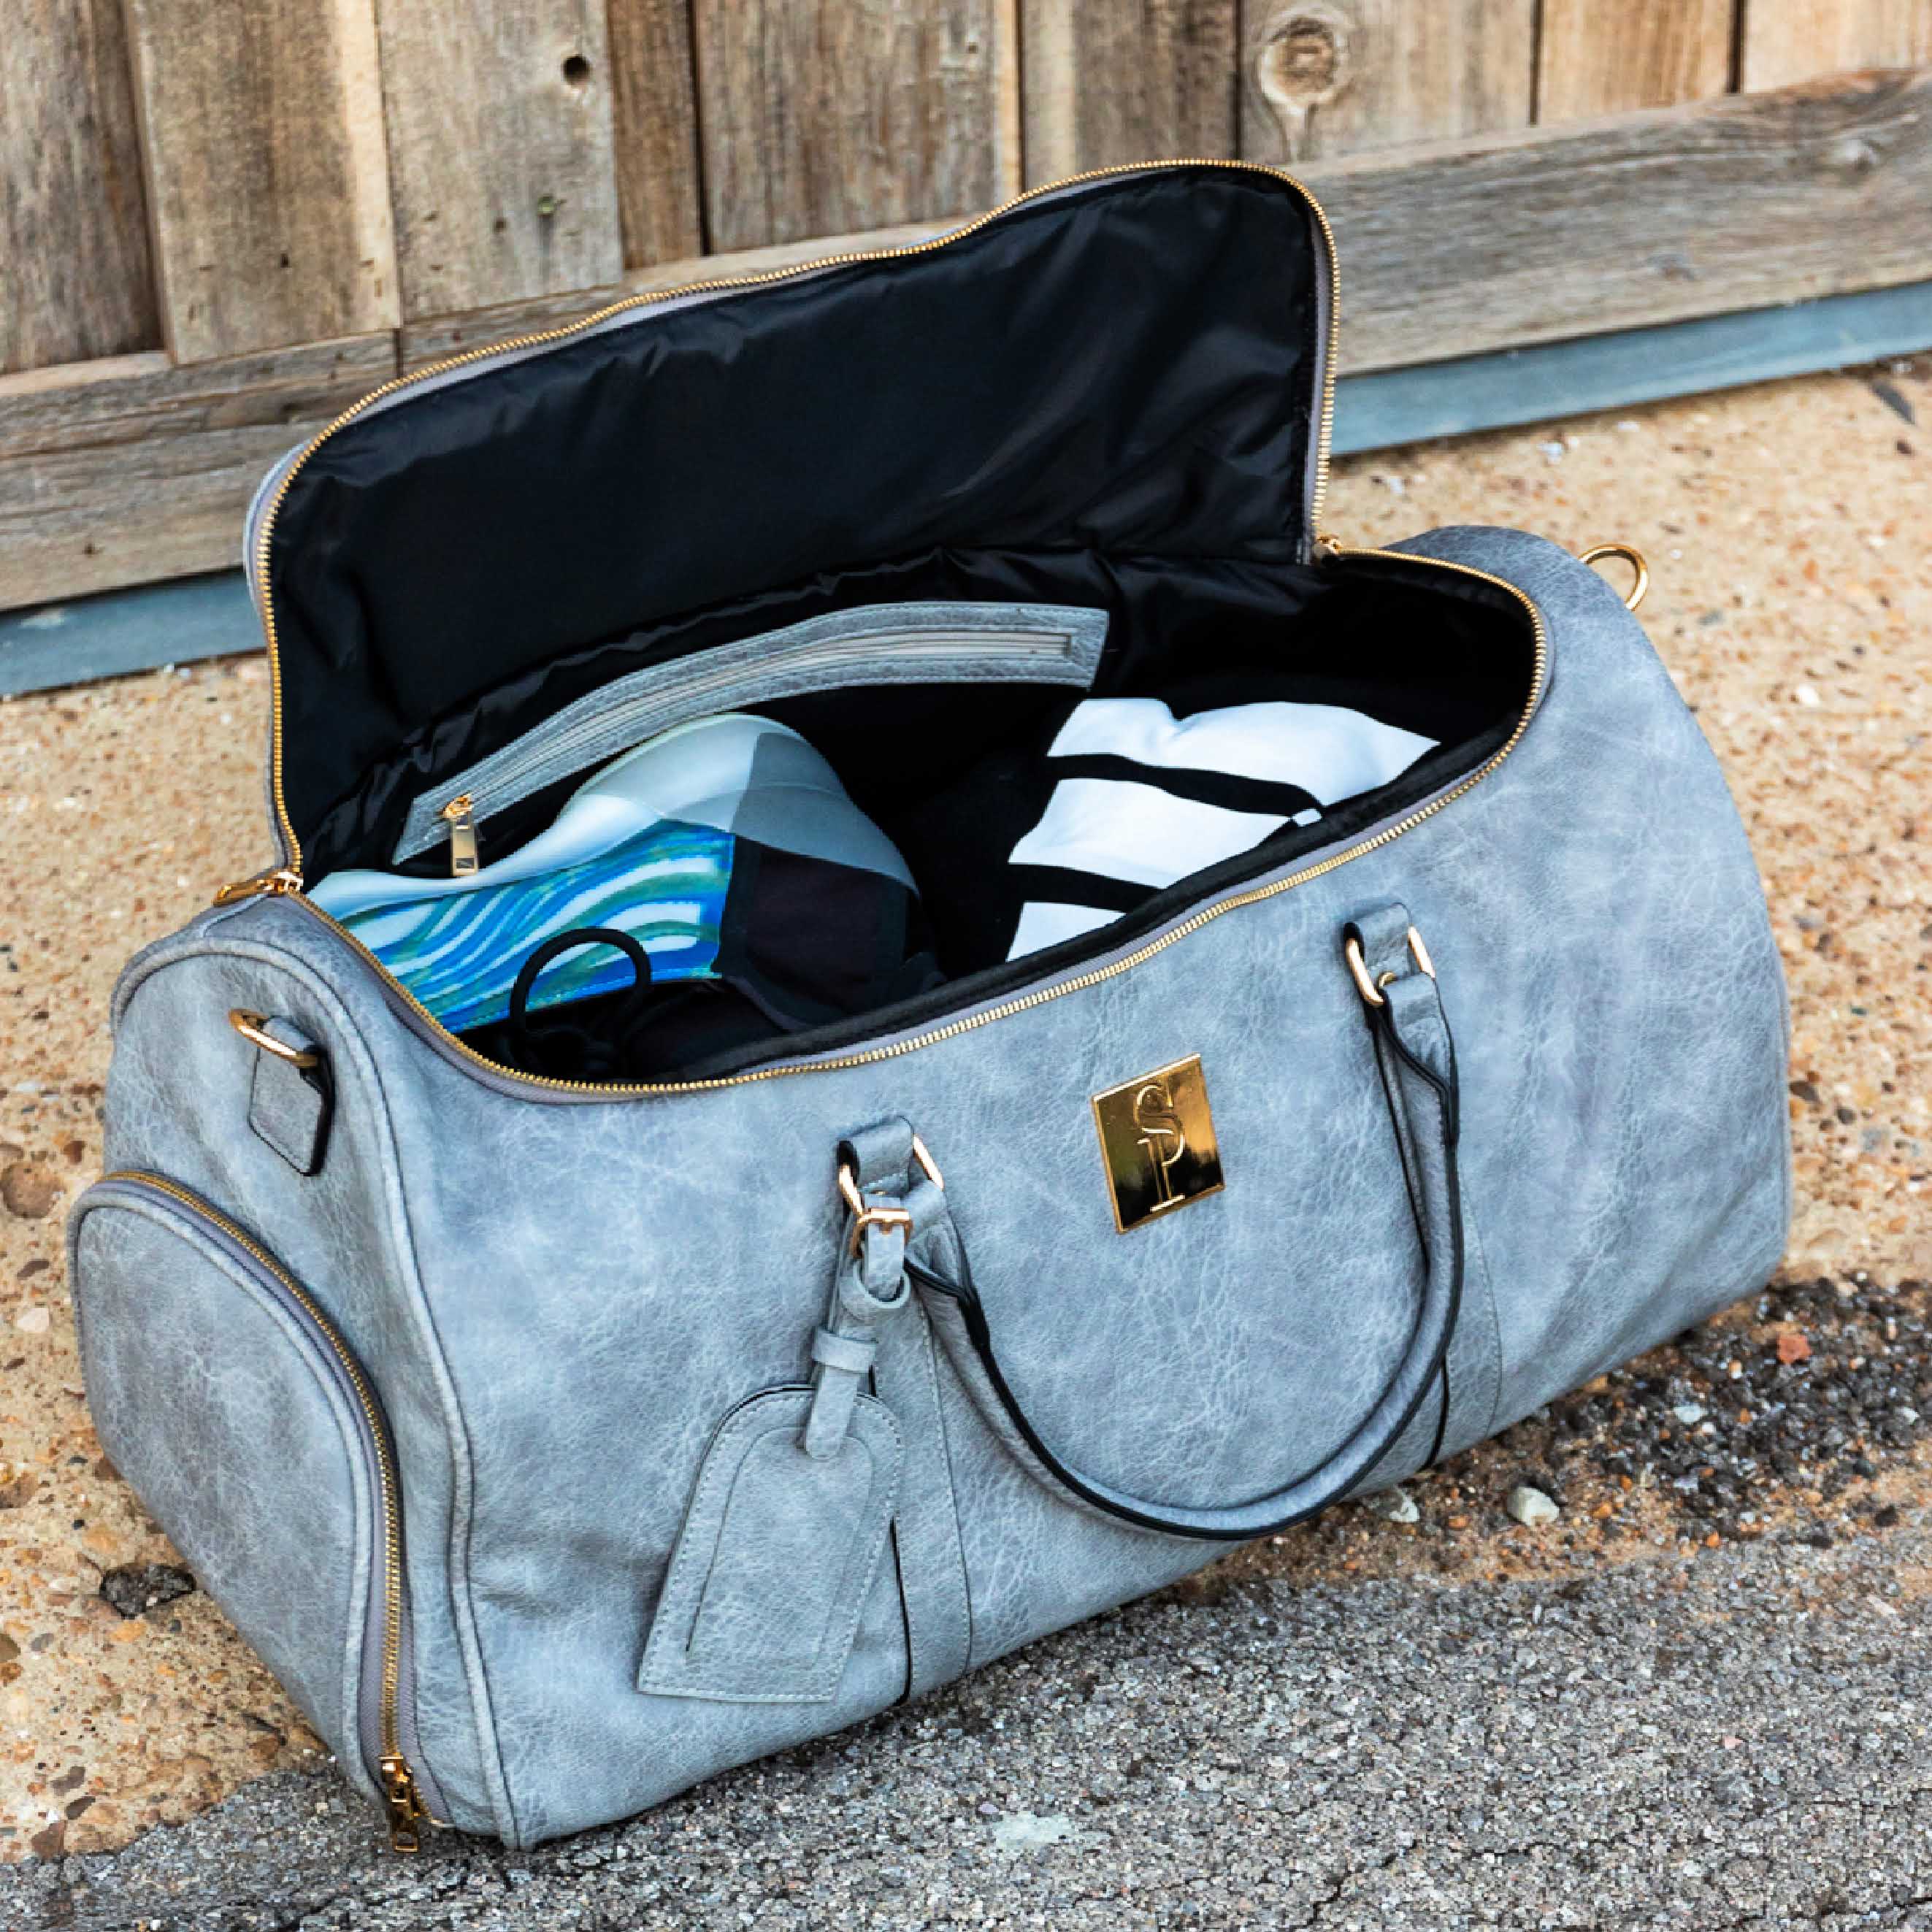 Duffle Bag Packing 101: Learn How to Pack Like a Pro